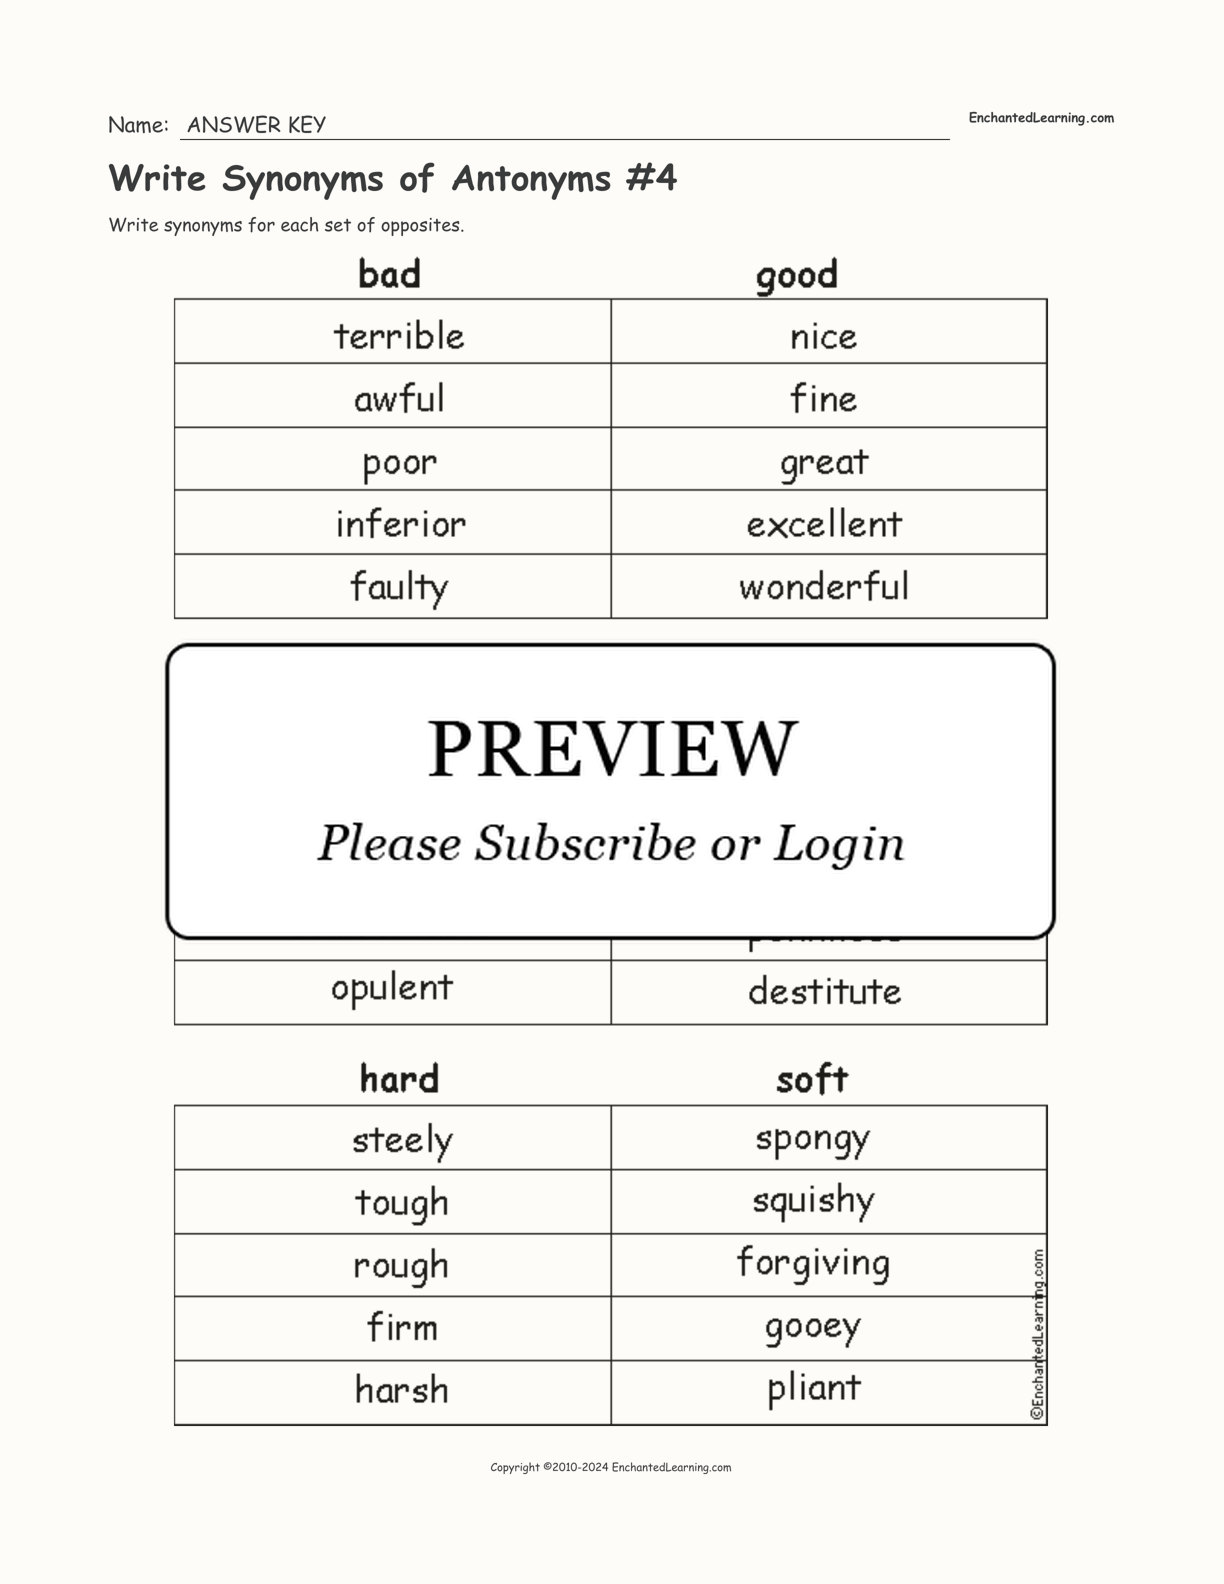 Write Synonyms of Antonyms #4 interactive worksheet page 2